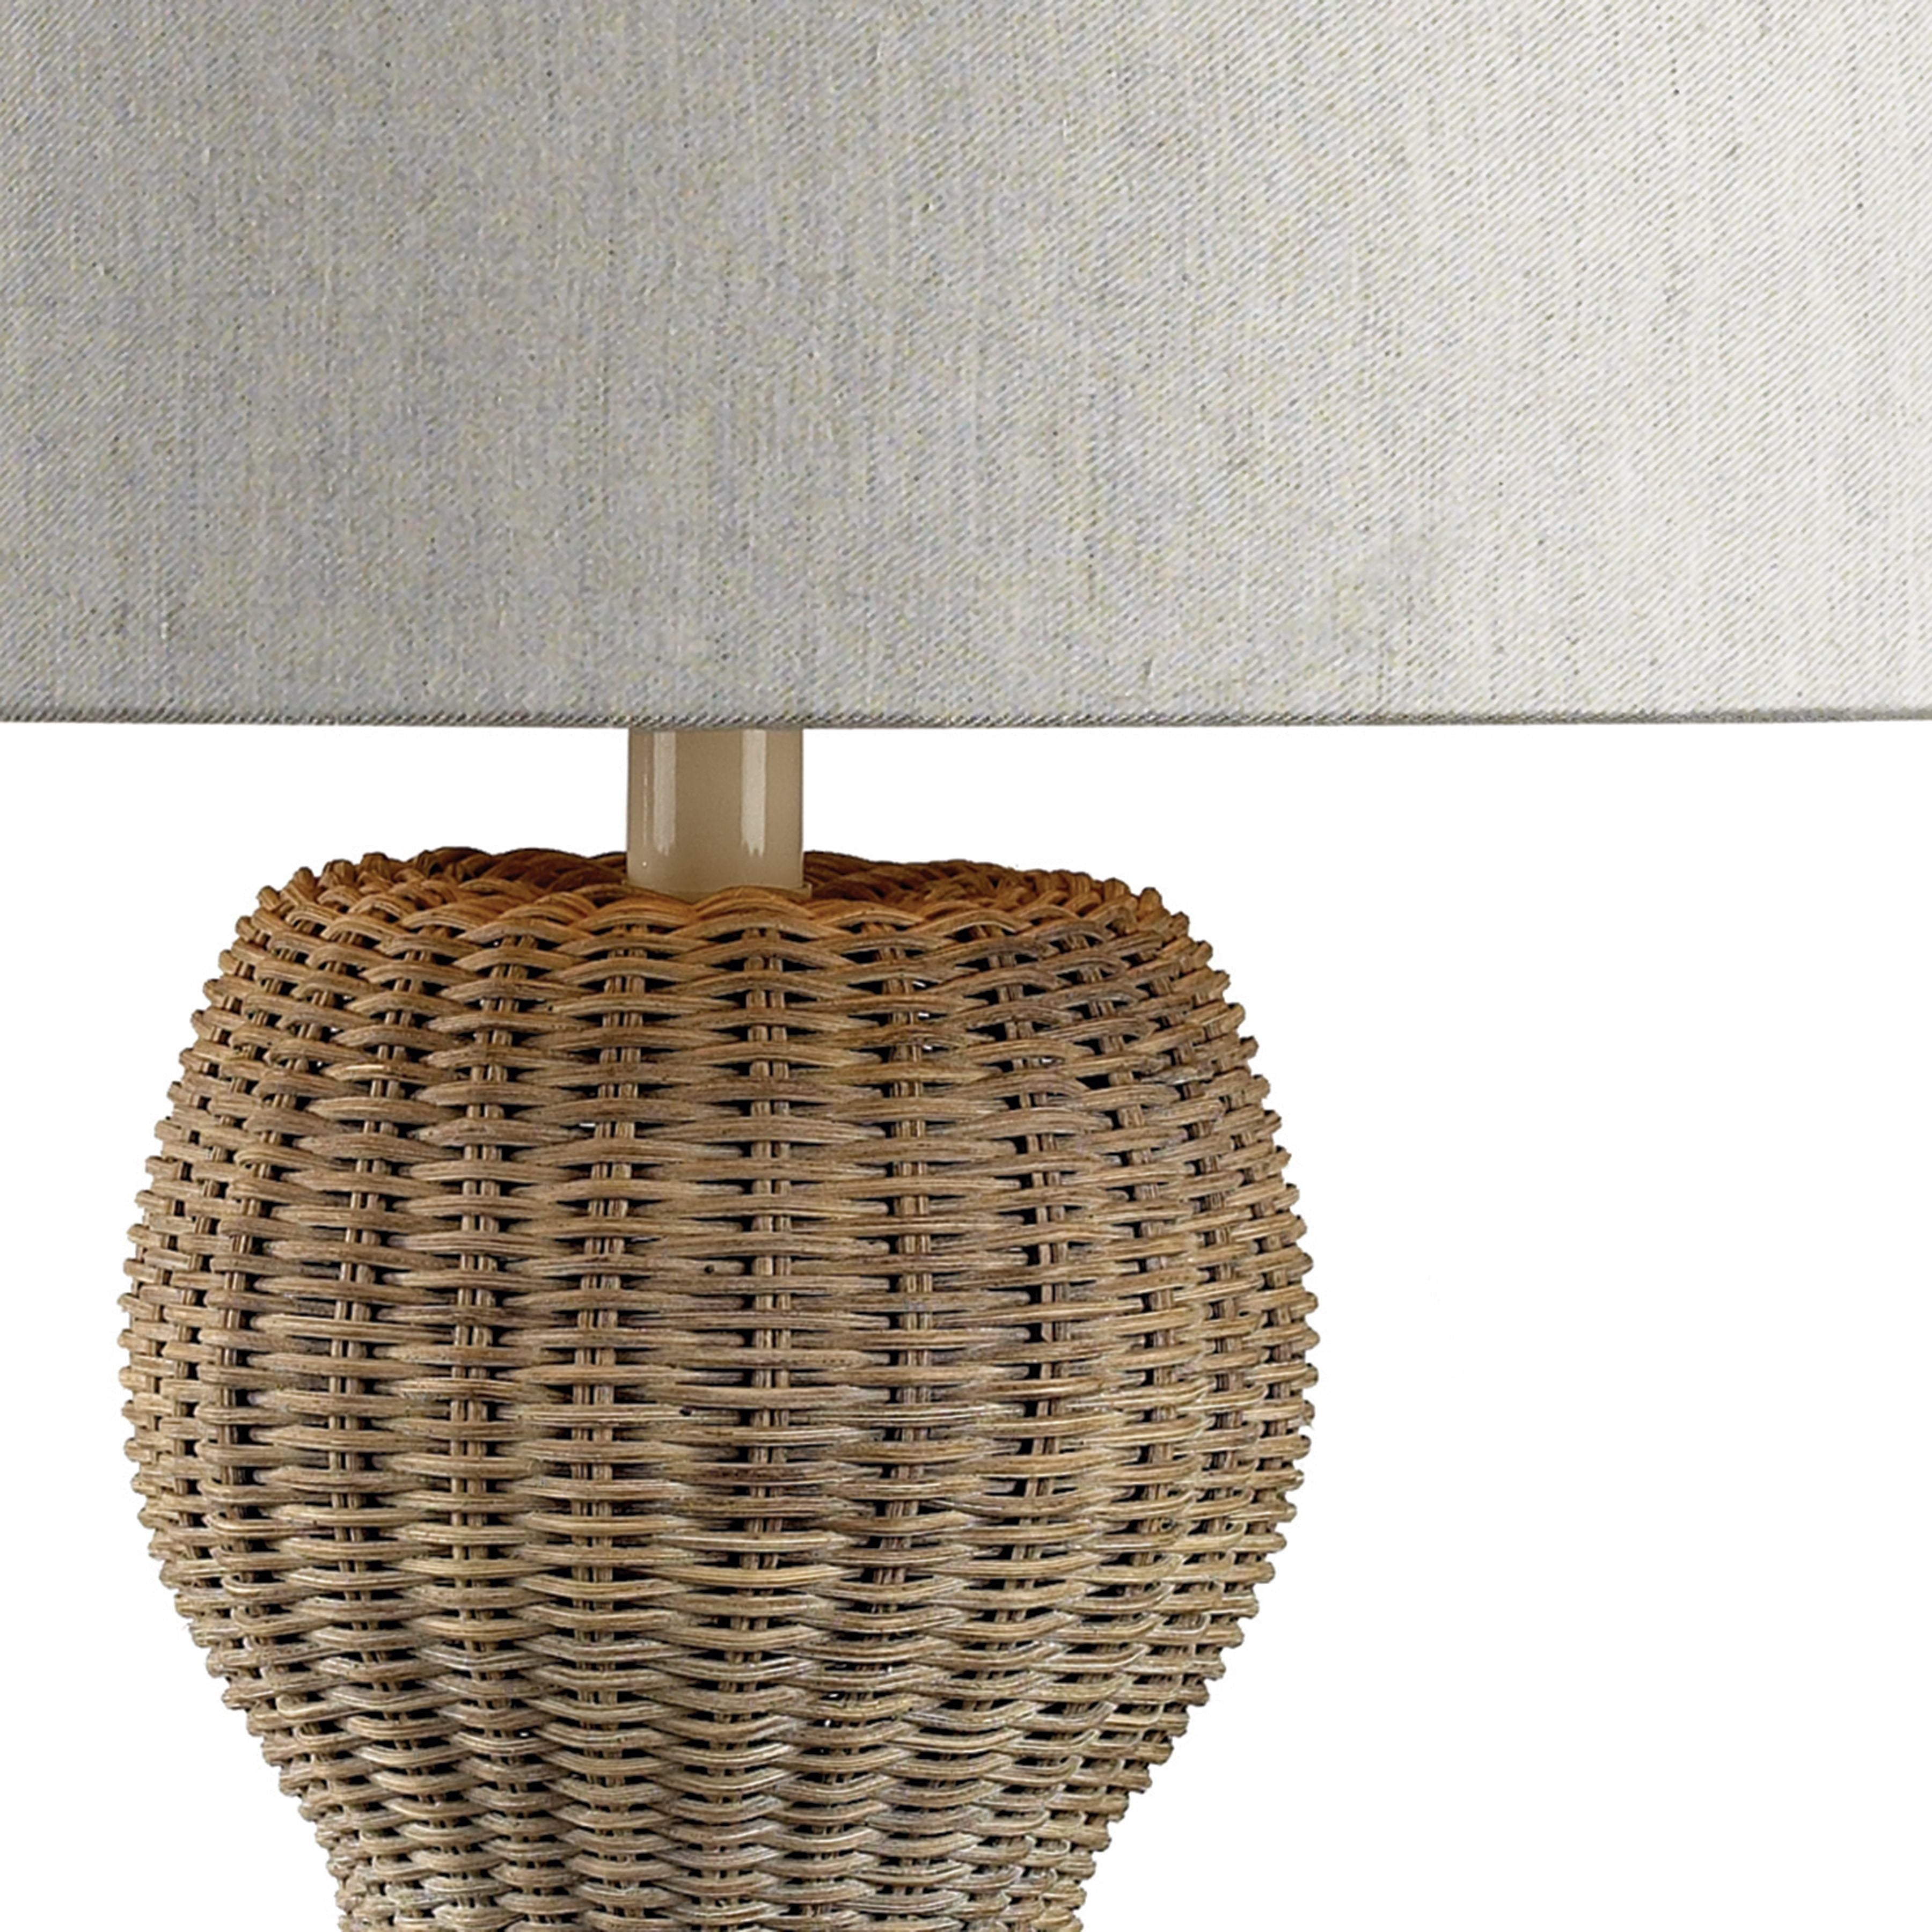 Sycamore Hill 26" High 1-Light Table Lamp